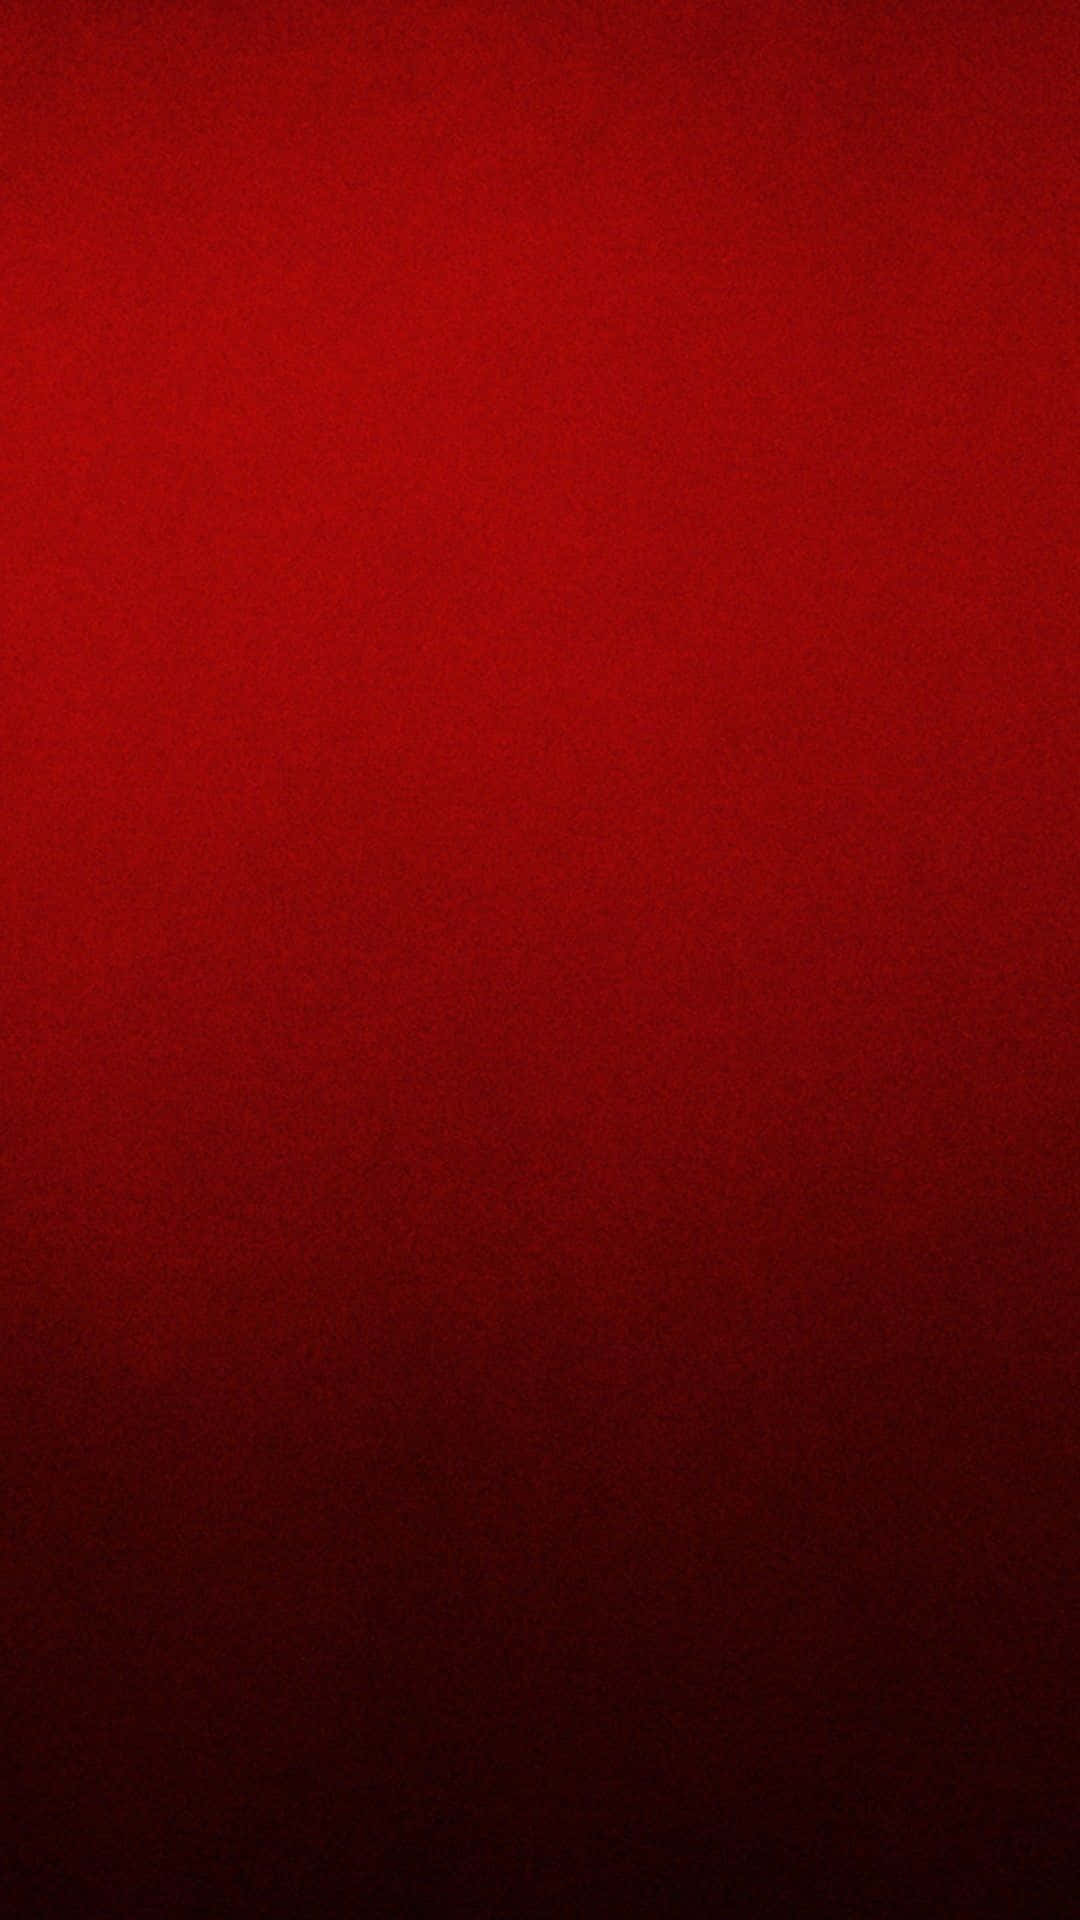 100+] Red Ombre Backgrounds